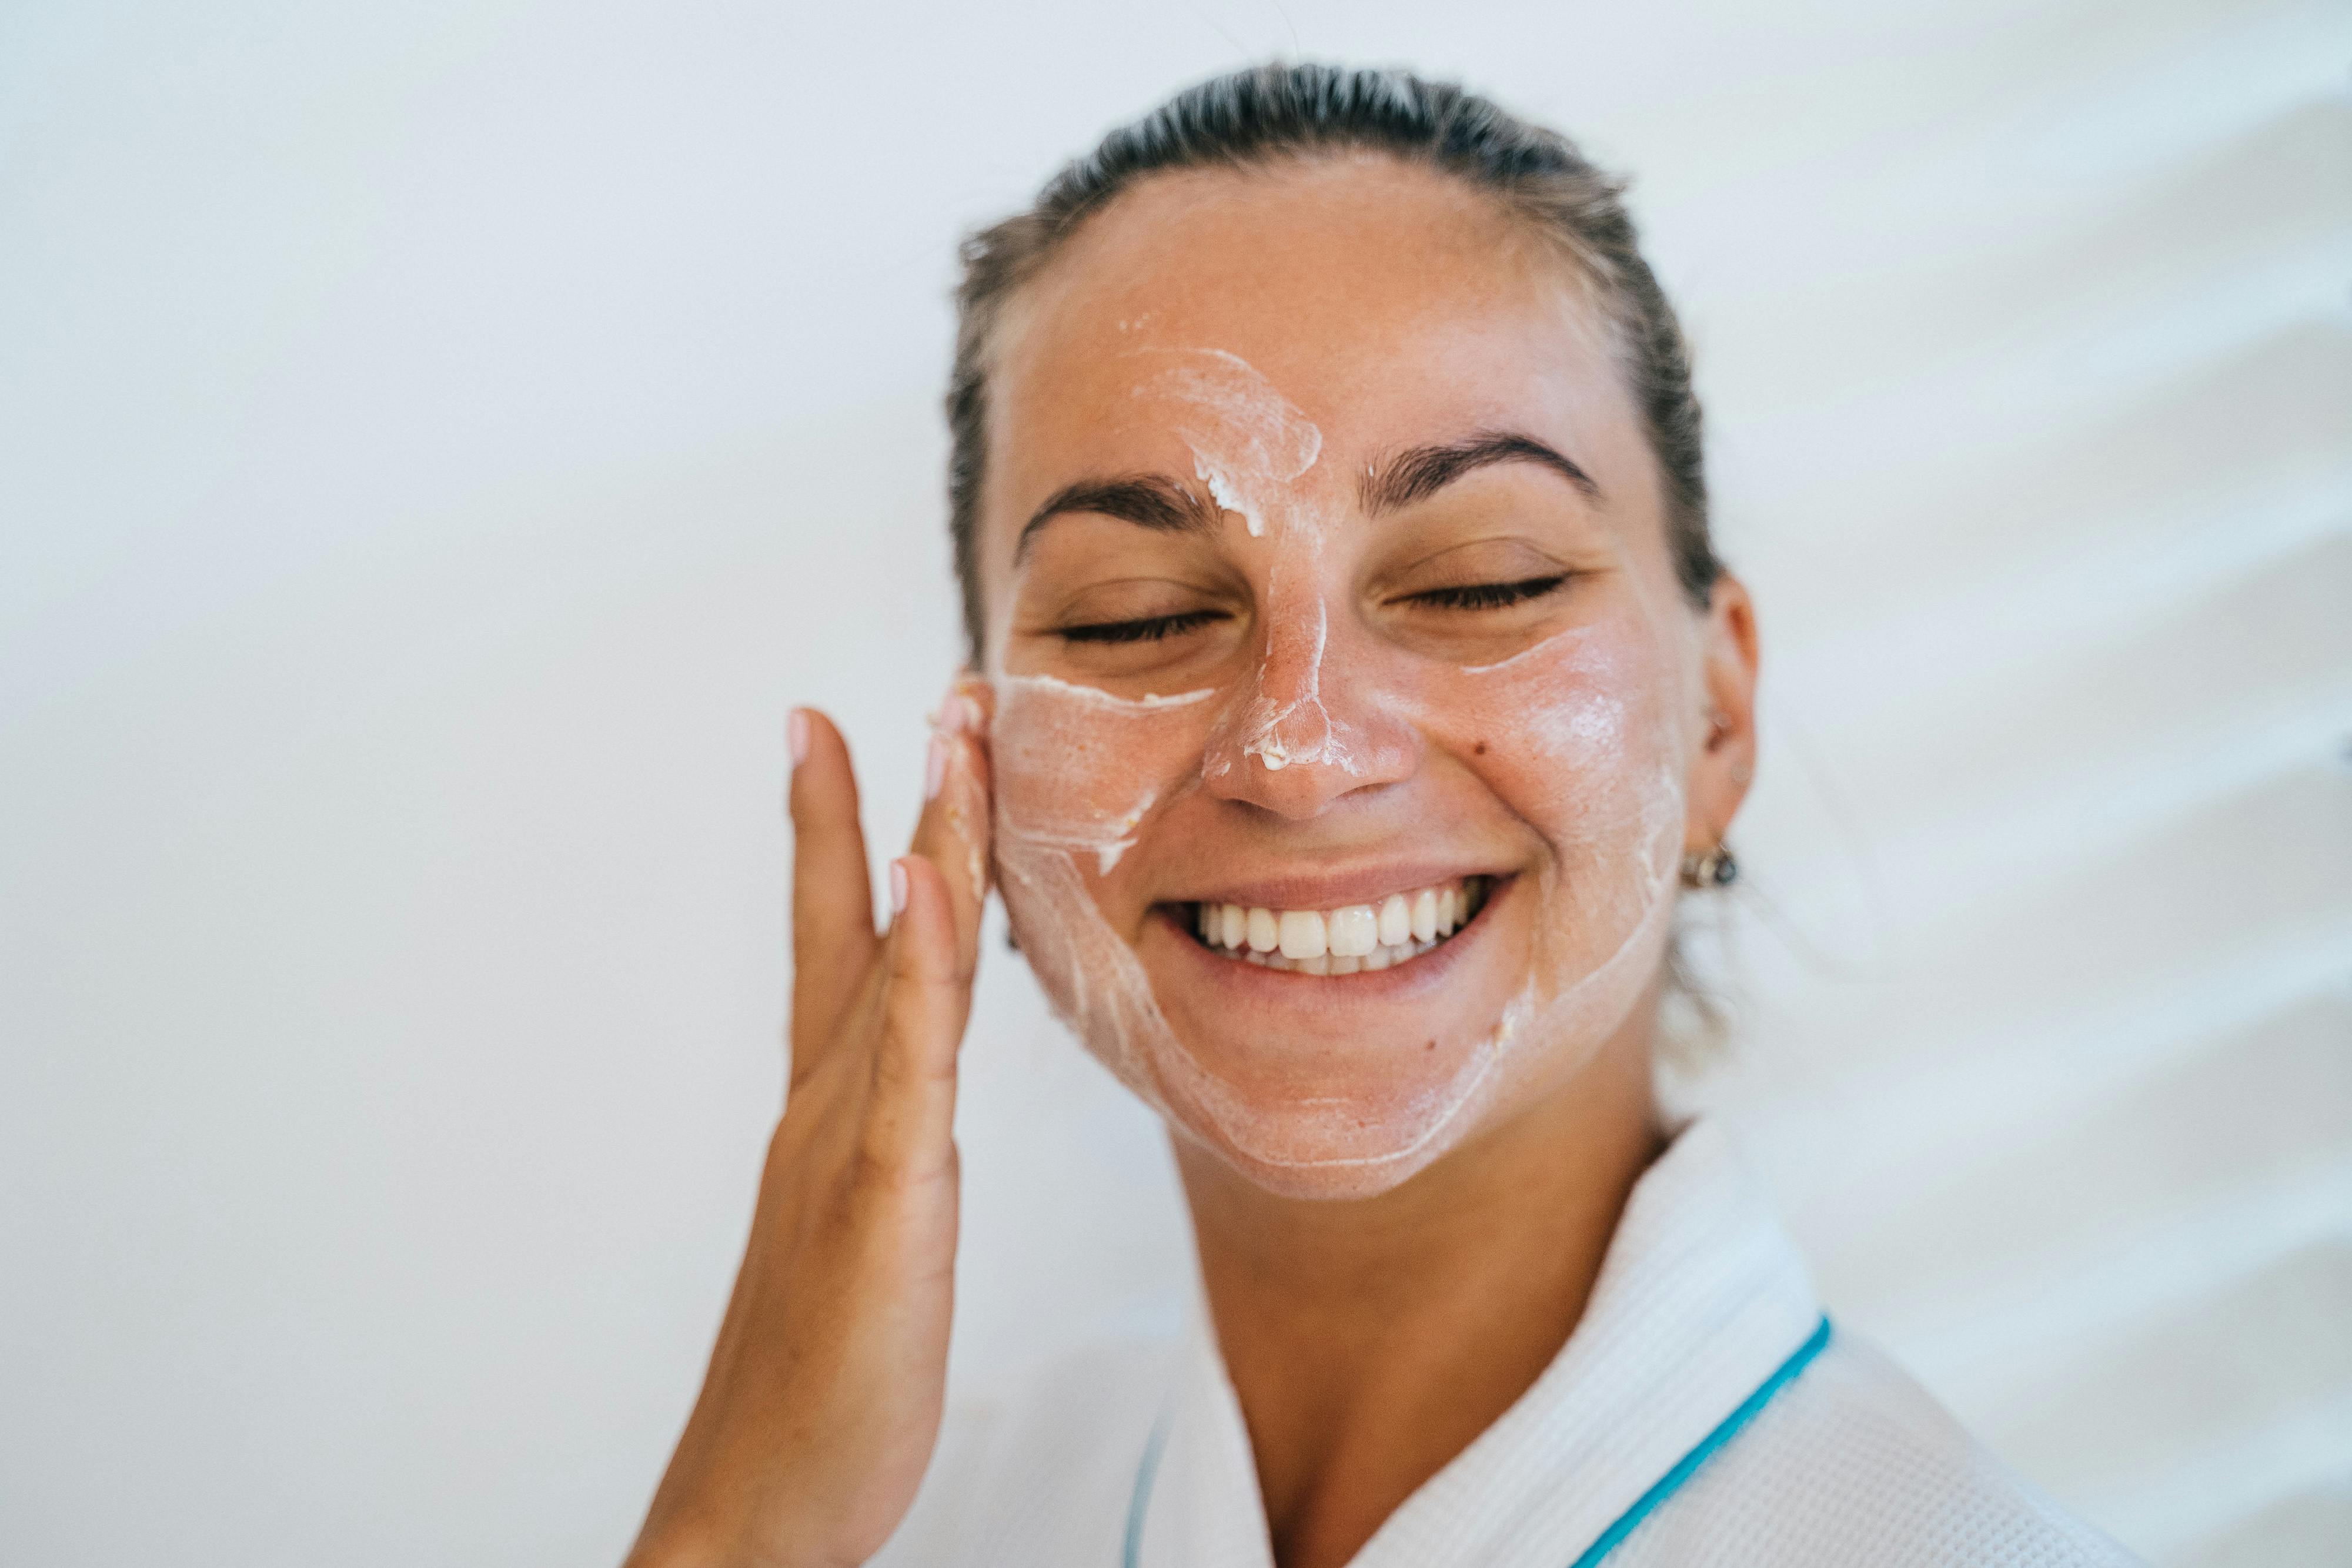 A Smiling Woman Applying Cream on Face · Free Stock Photo